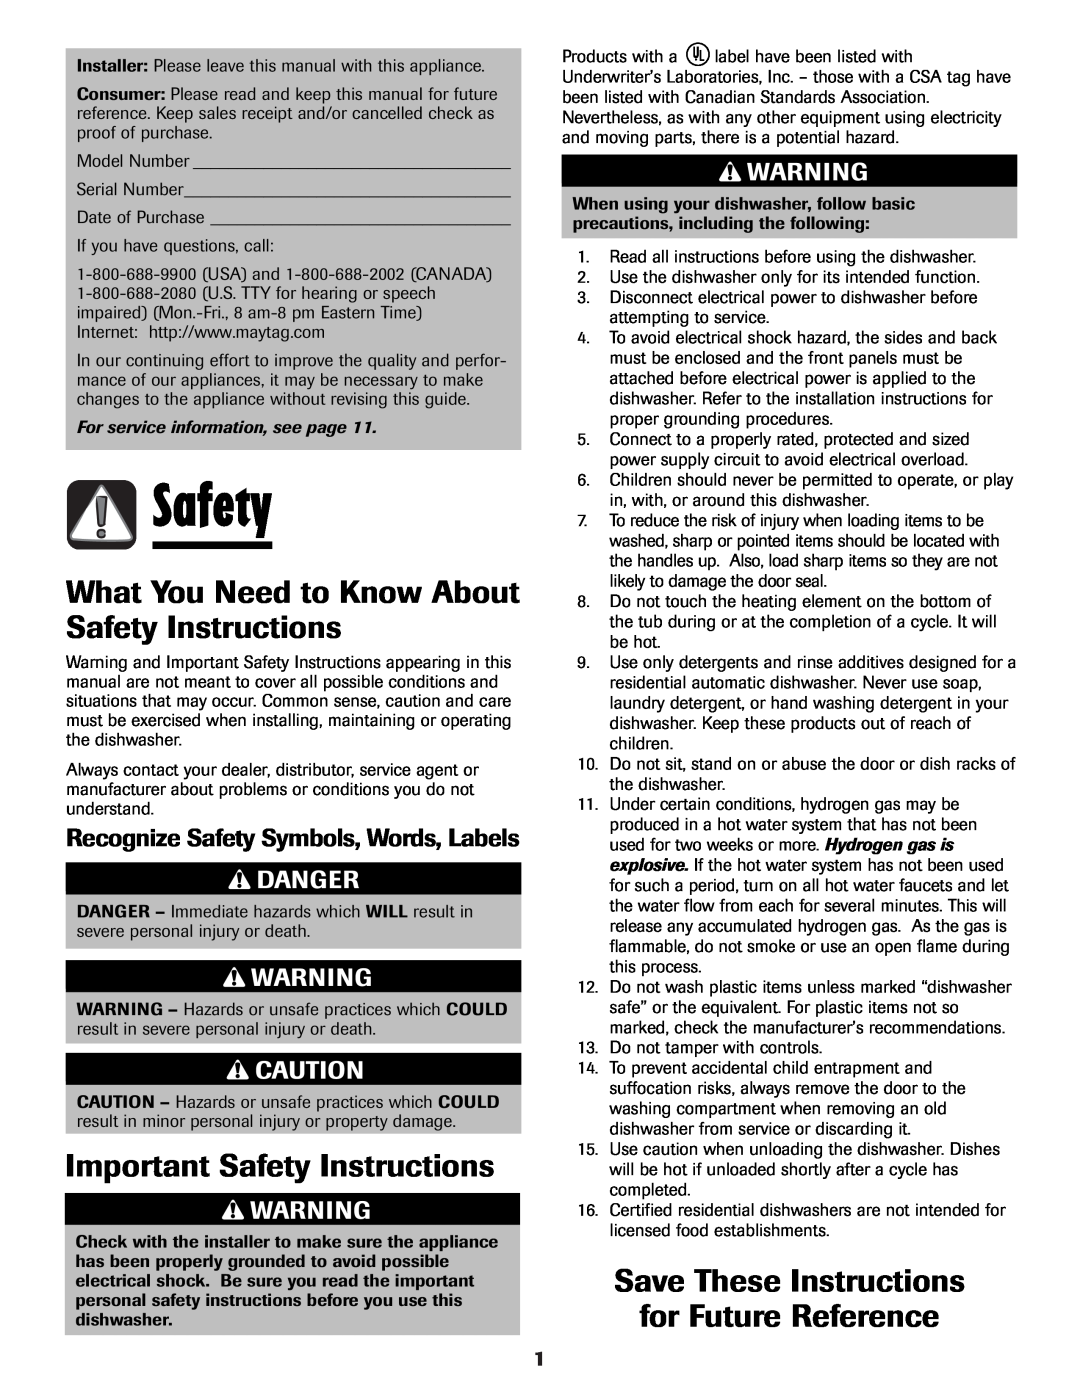 Maytag MDB-7 warranty What You Need to Know About Safety Instructions, Important Safety Instructions, Danger 